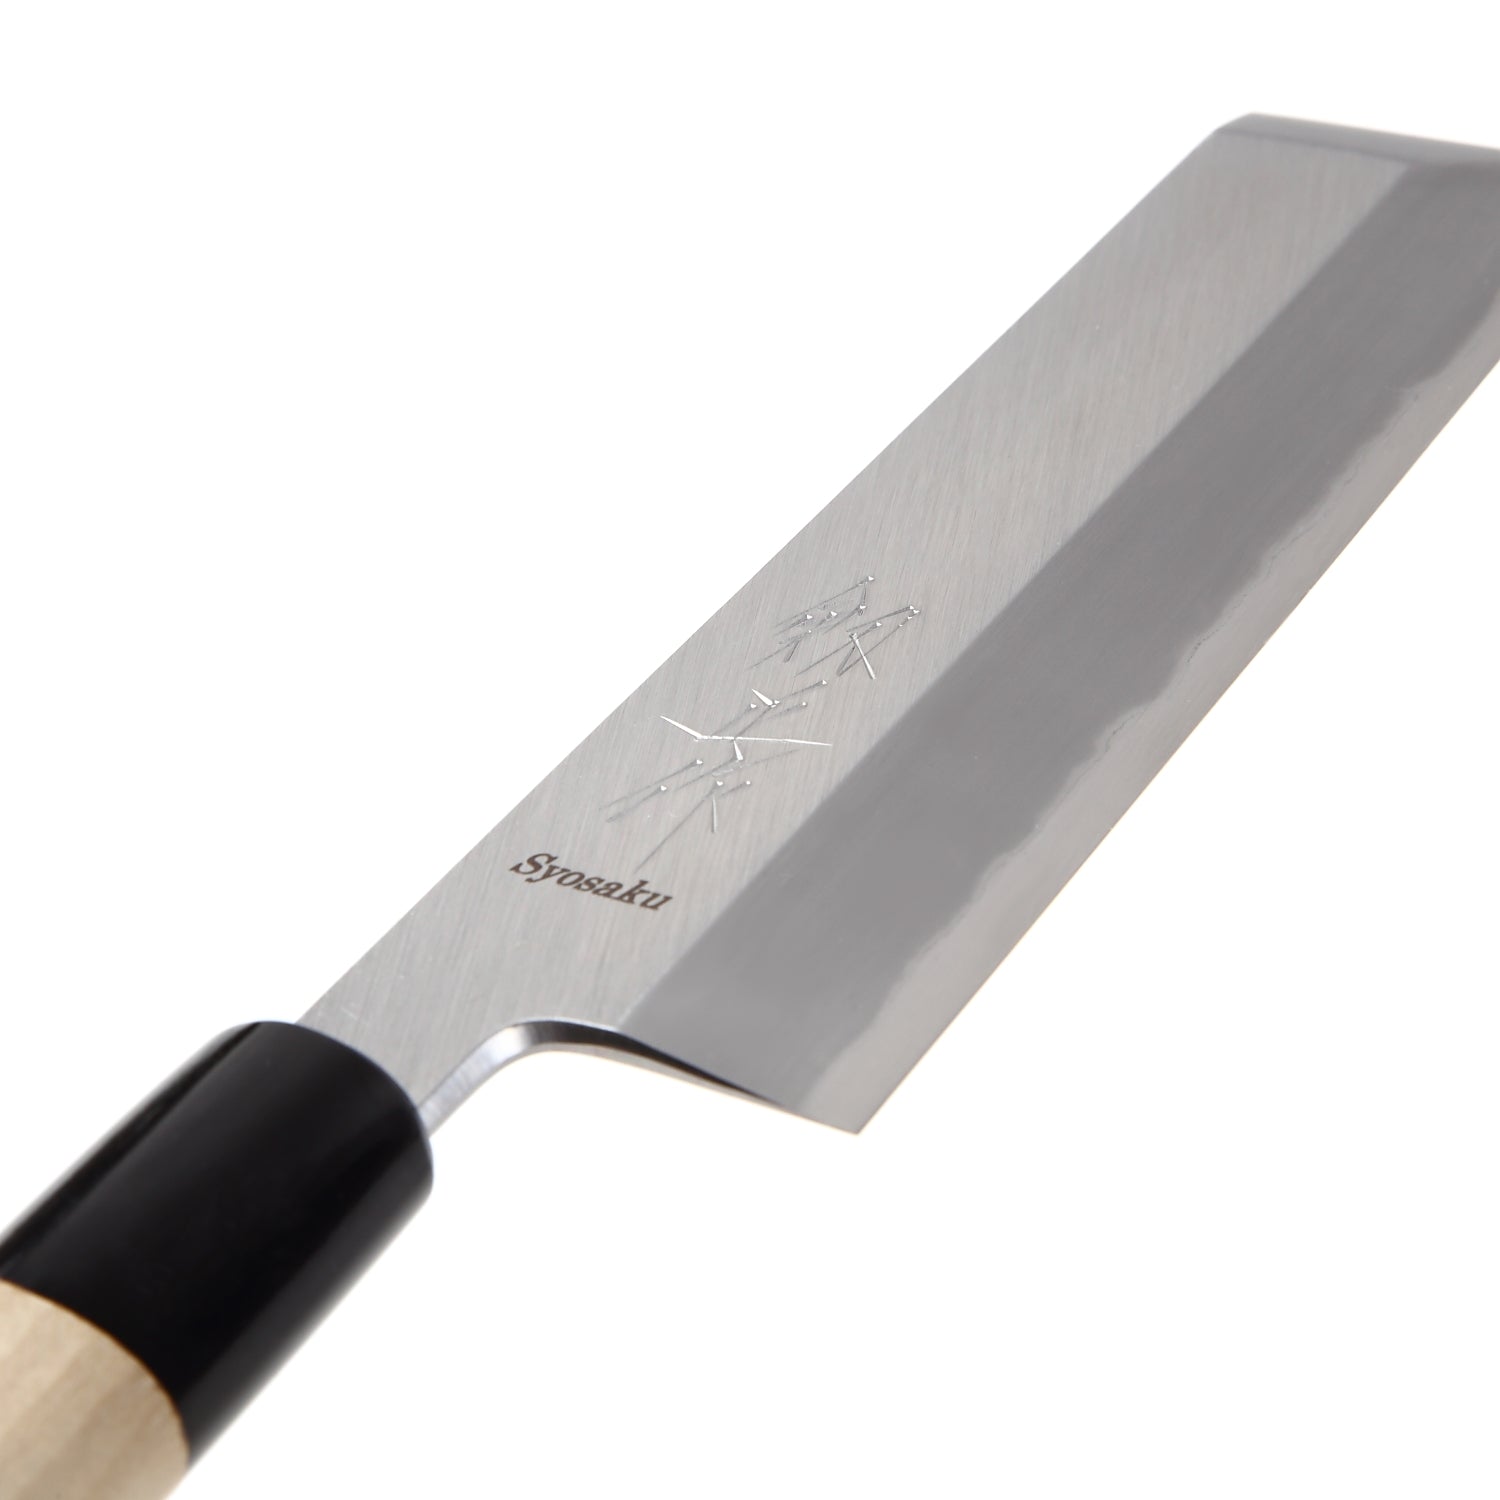 Serco Sof-White Stainless 17 53259 Long Meat Slicer Knife Cutlery Made in  Japan on eBid United States